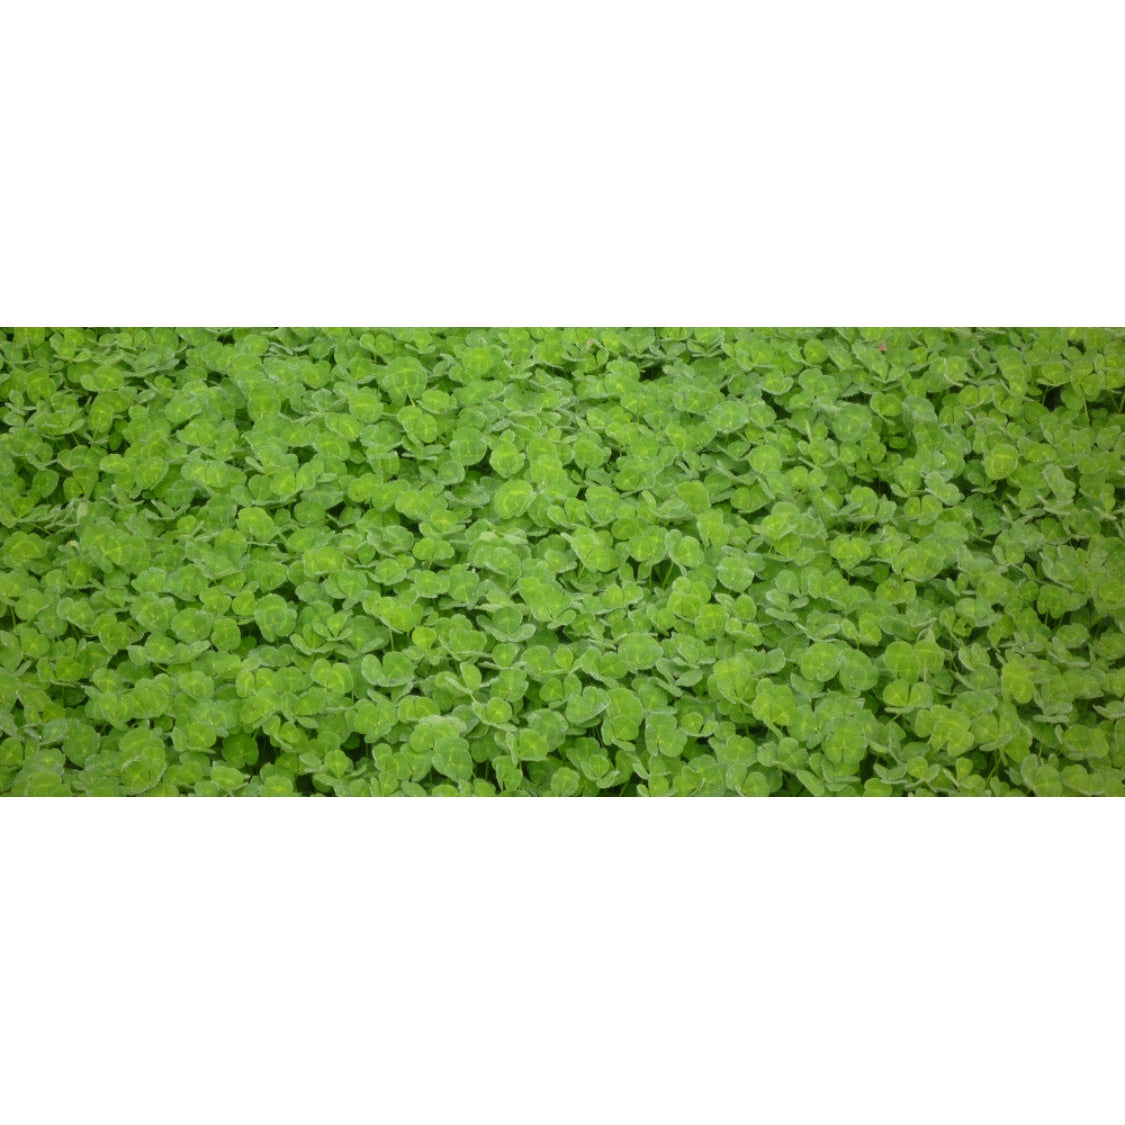 Rosabrook Sub Clover Coated Seeds